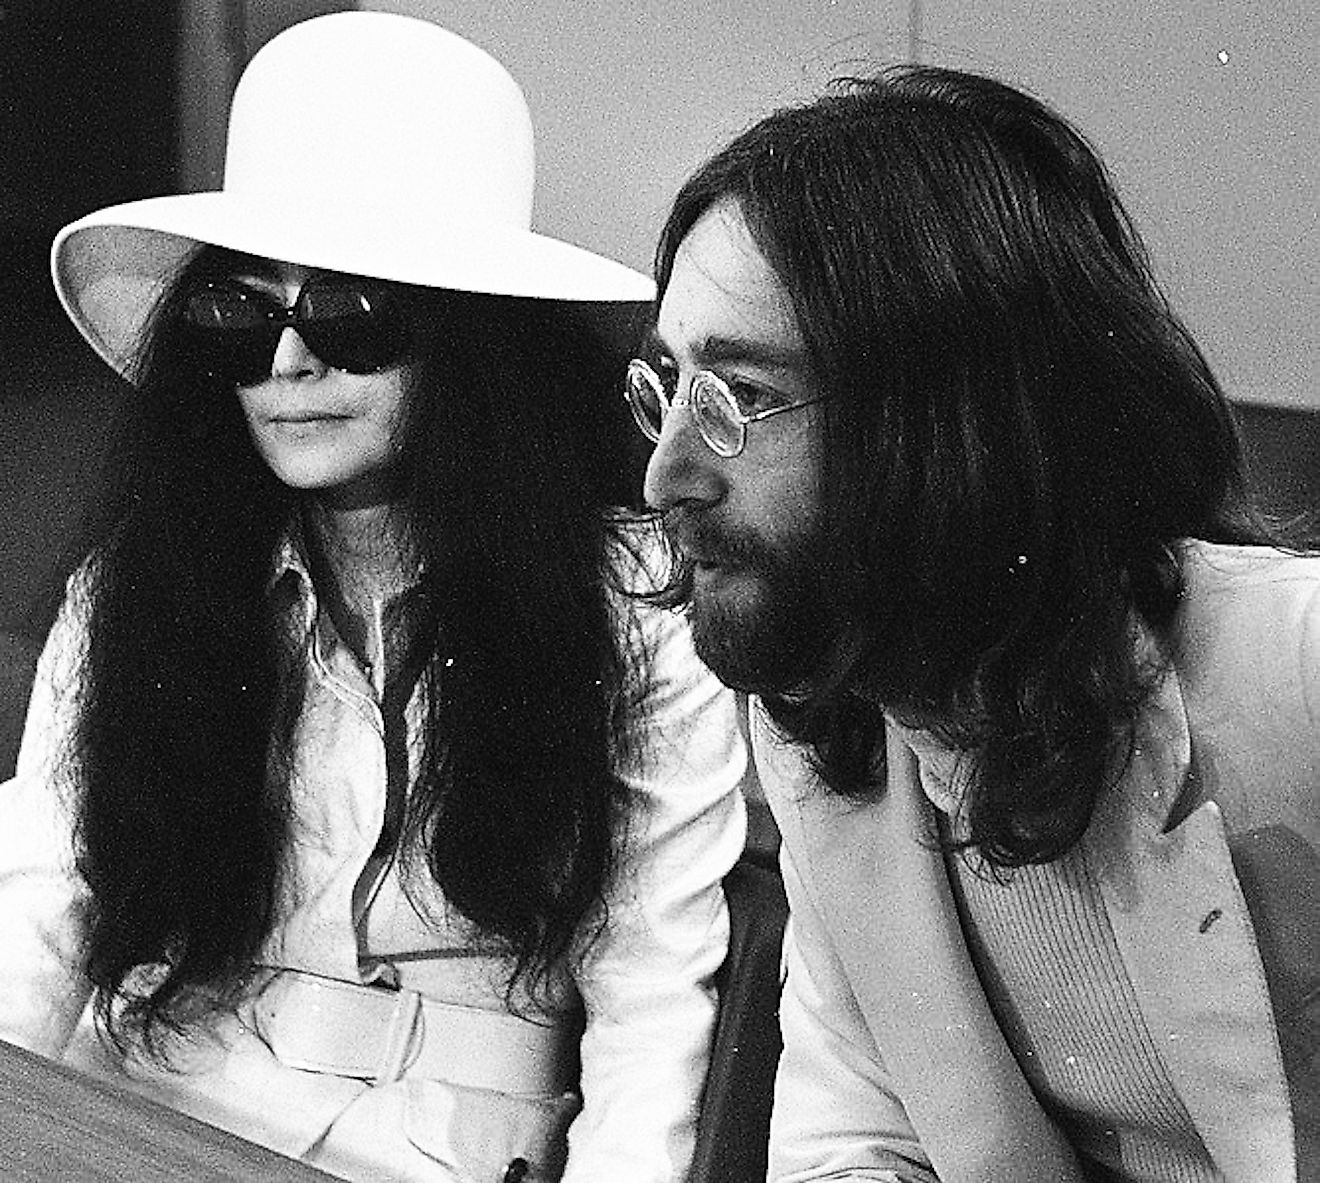 Yoko Ono and Lennon in March 1969. Image credit: Joost Evers/Anefo